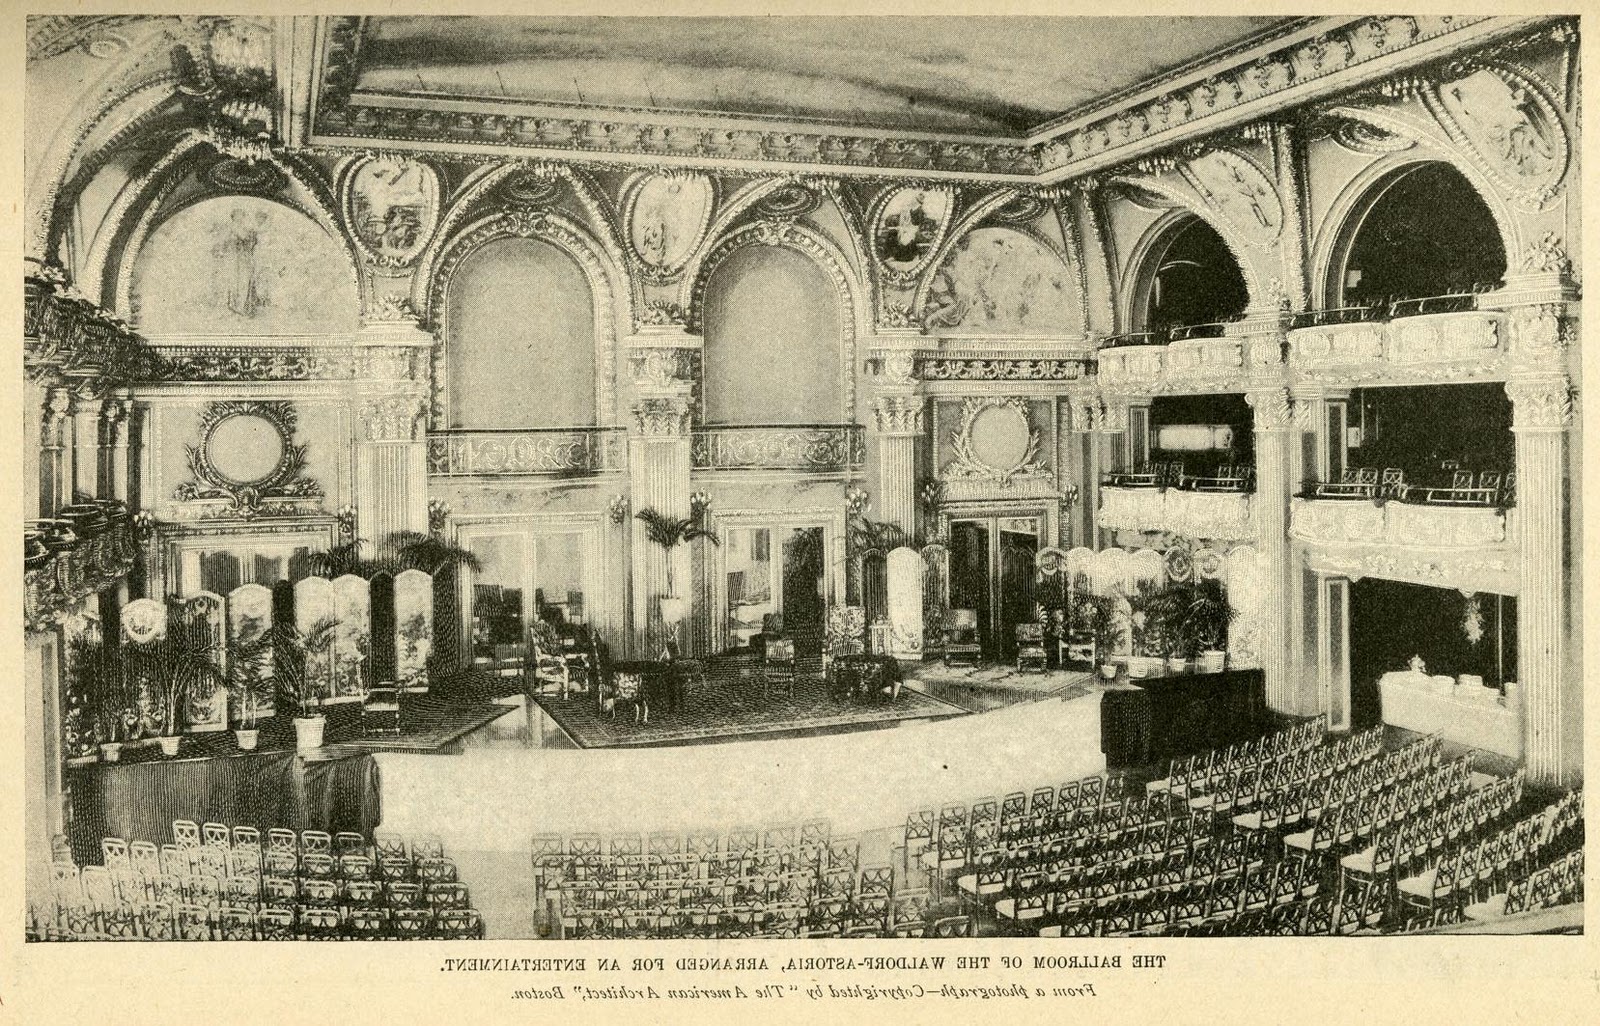 The Ballroom of the